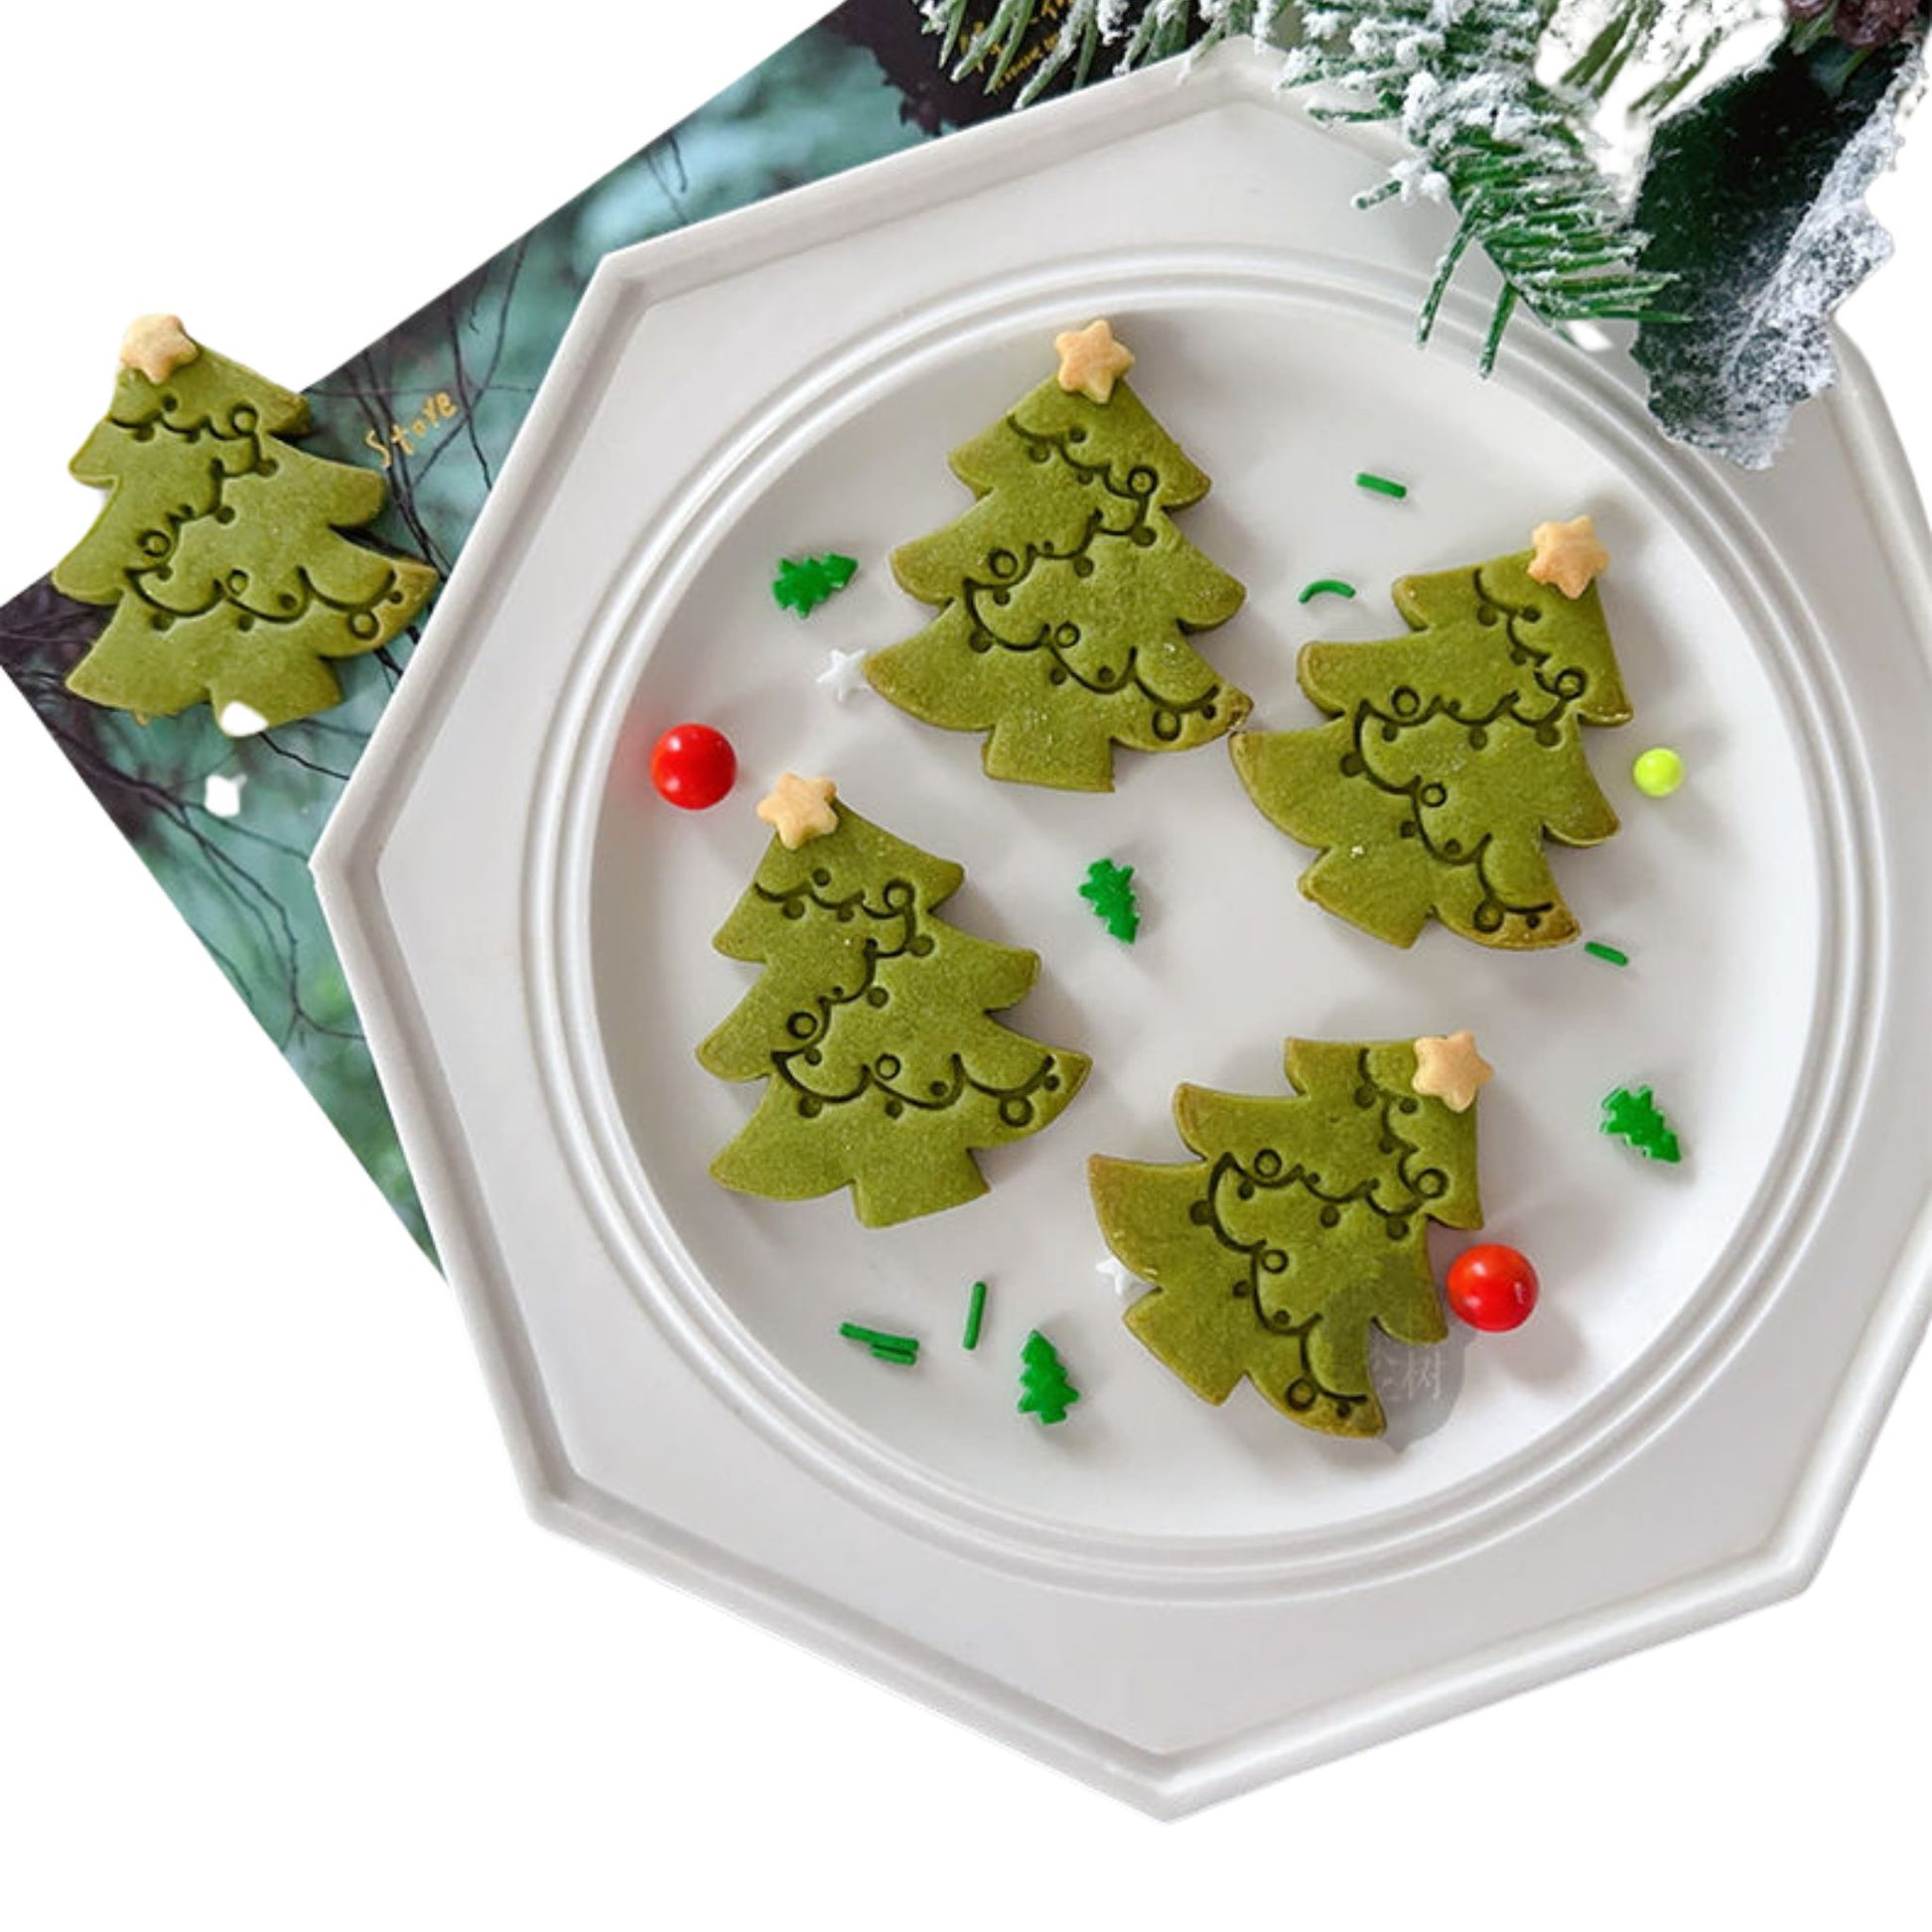 Christmas Cookie Cutters Oven-safe Silicone Molds Christmas Silicone Mold  Set Food-grade Non-stick Shapes for Easy for Cookies